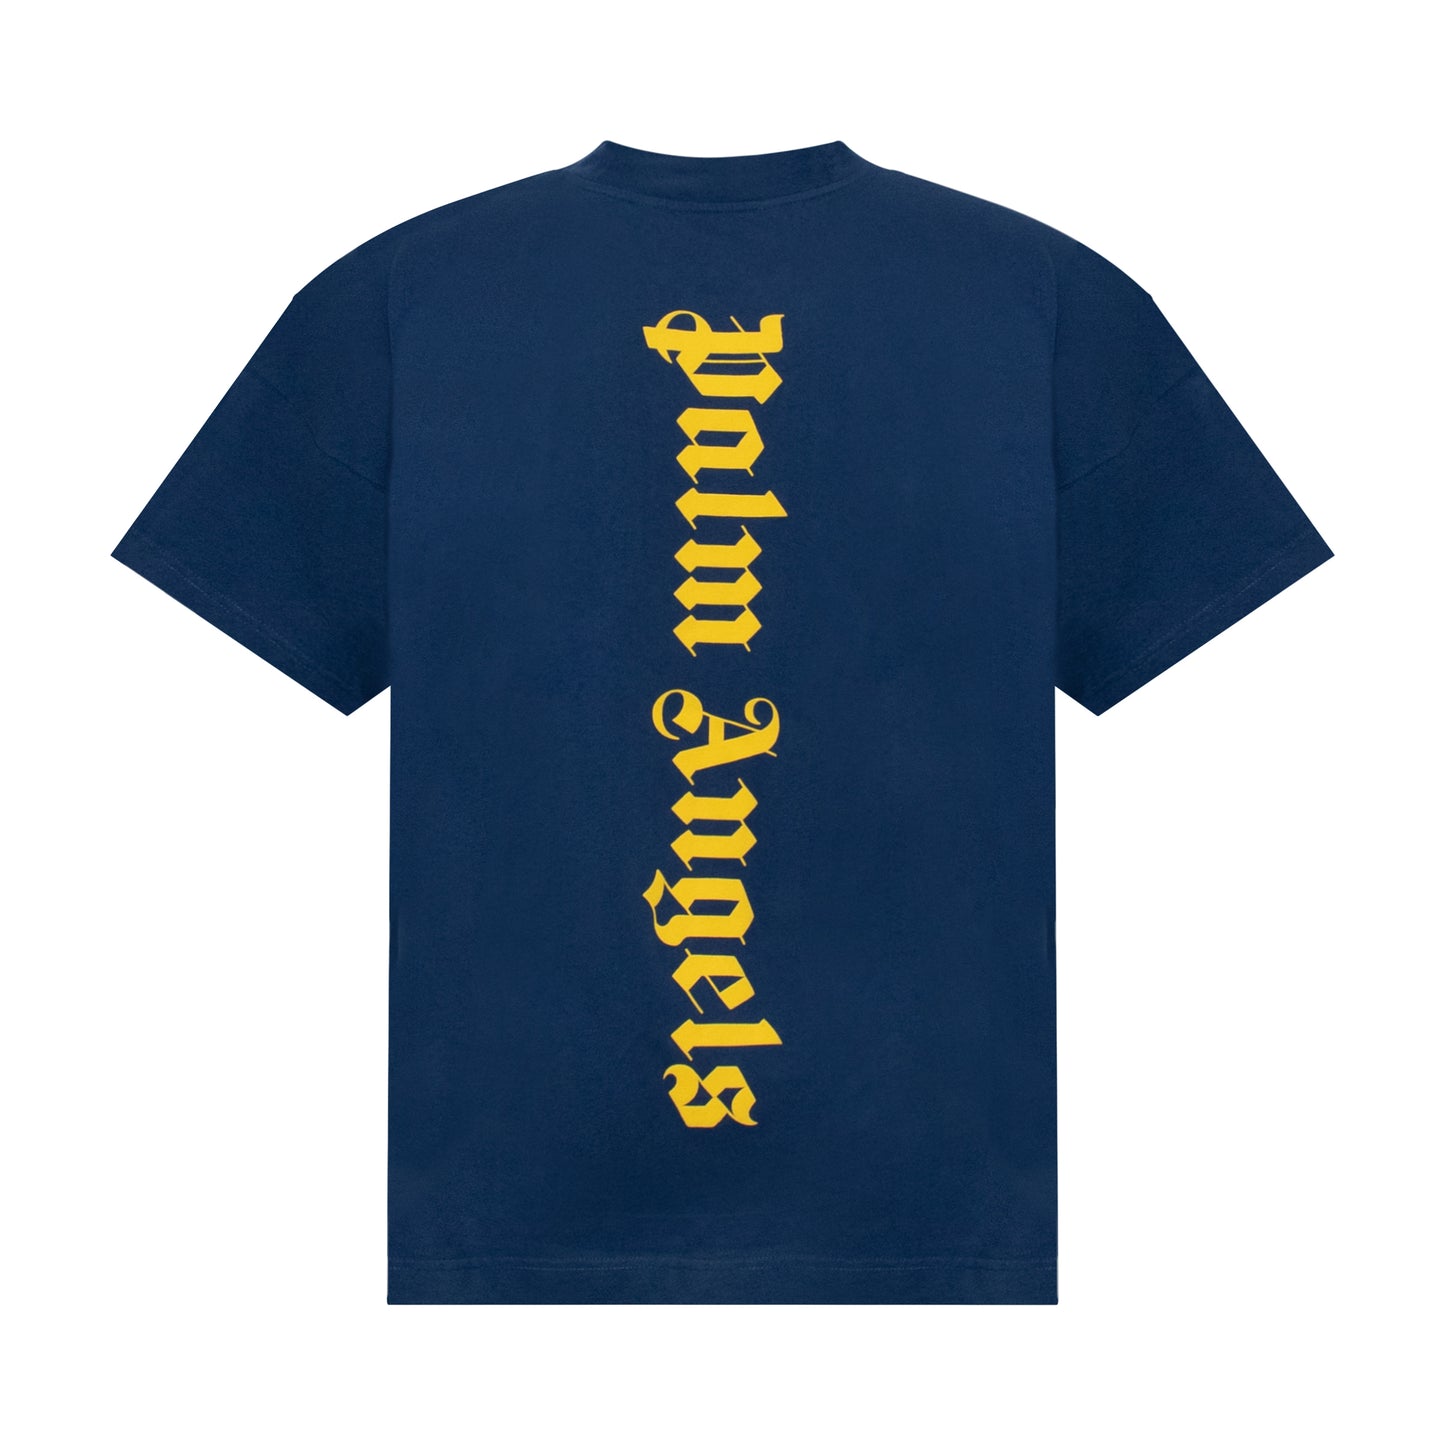 Ns Logo Over T-Shirt in Navy Blue